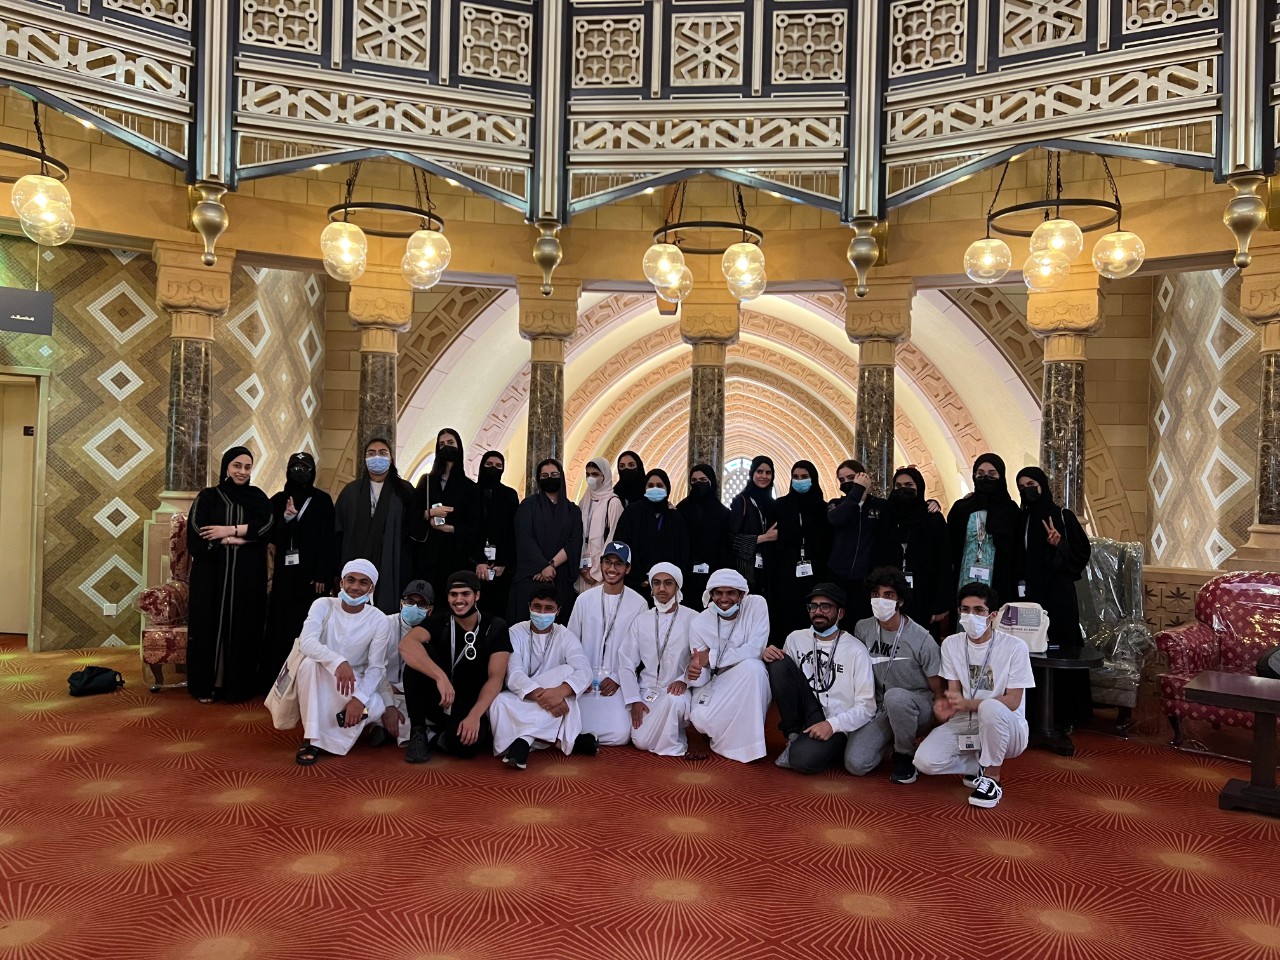 30 High Achieving Emirati High School Students Successfully Completed NYUAD’s Summer Academy Program